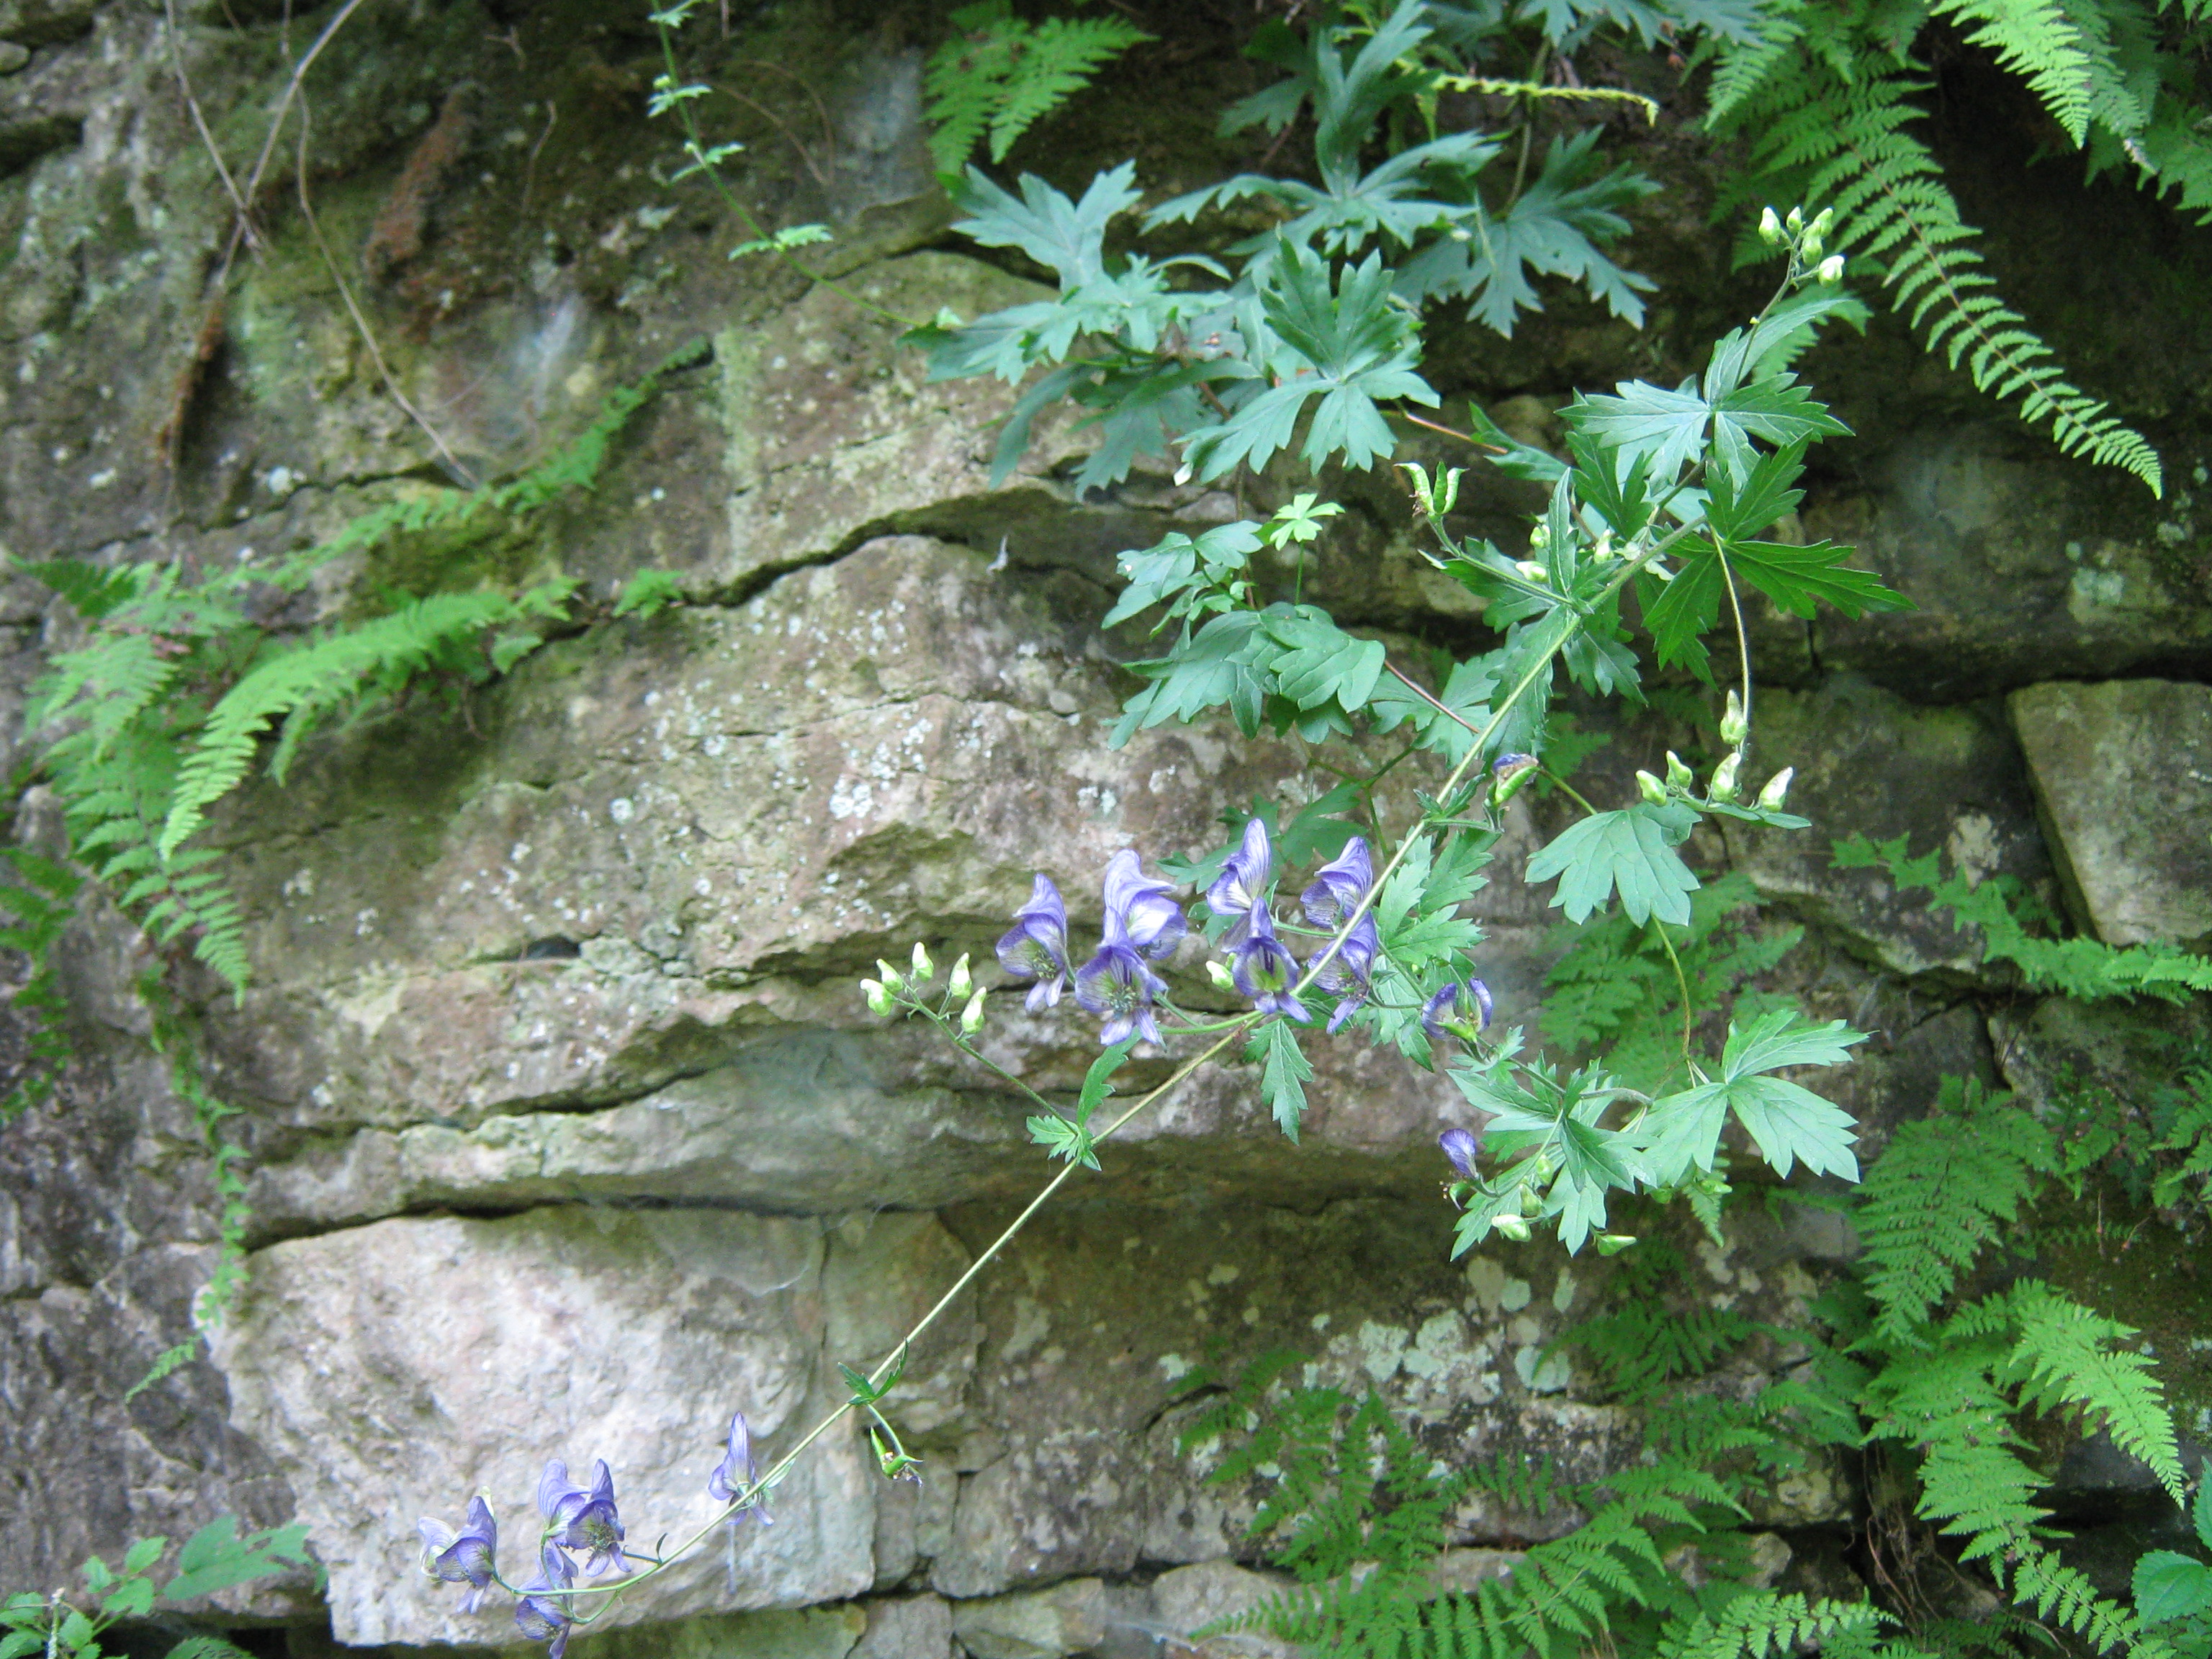 Monkshood hanging over side of the bluff